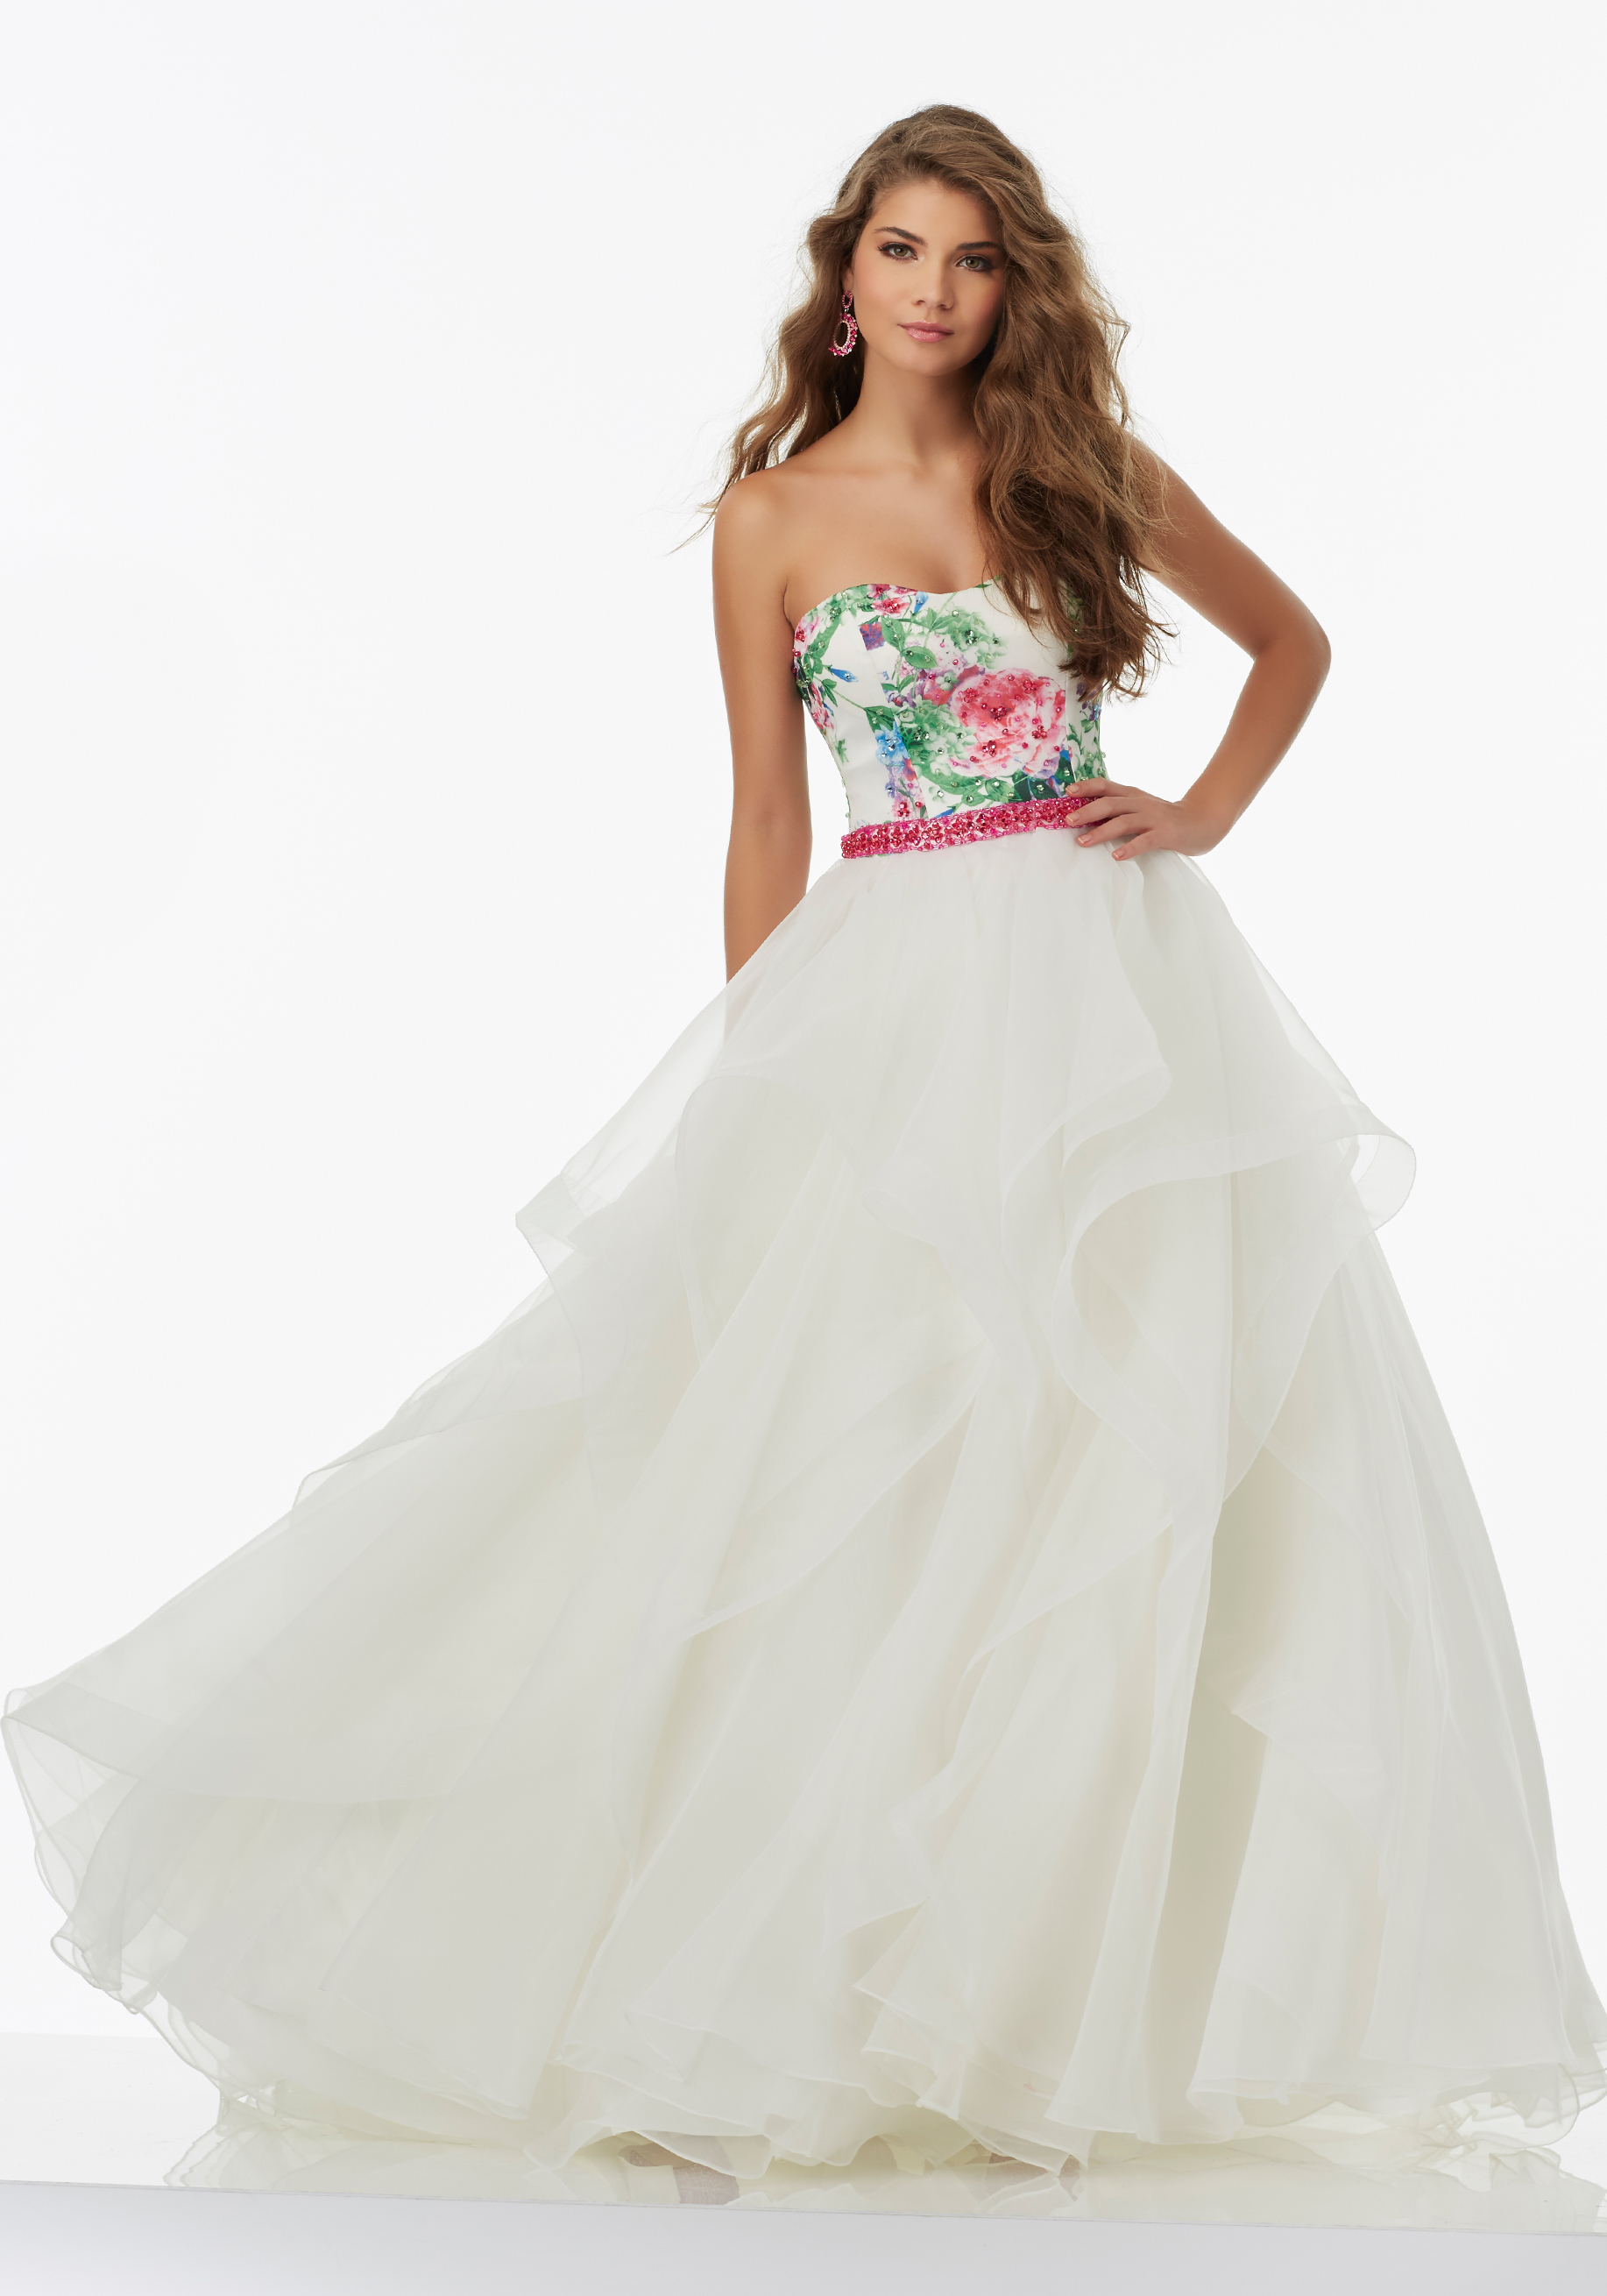 ball gown prom dresses prom dresses floral printed organza prom ballgown ... POUOARX